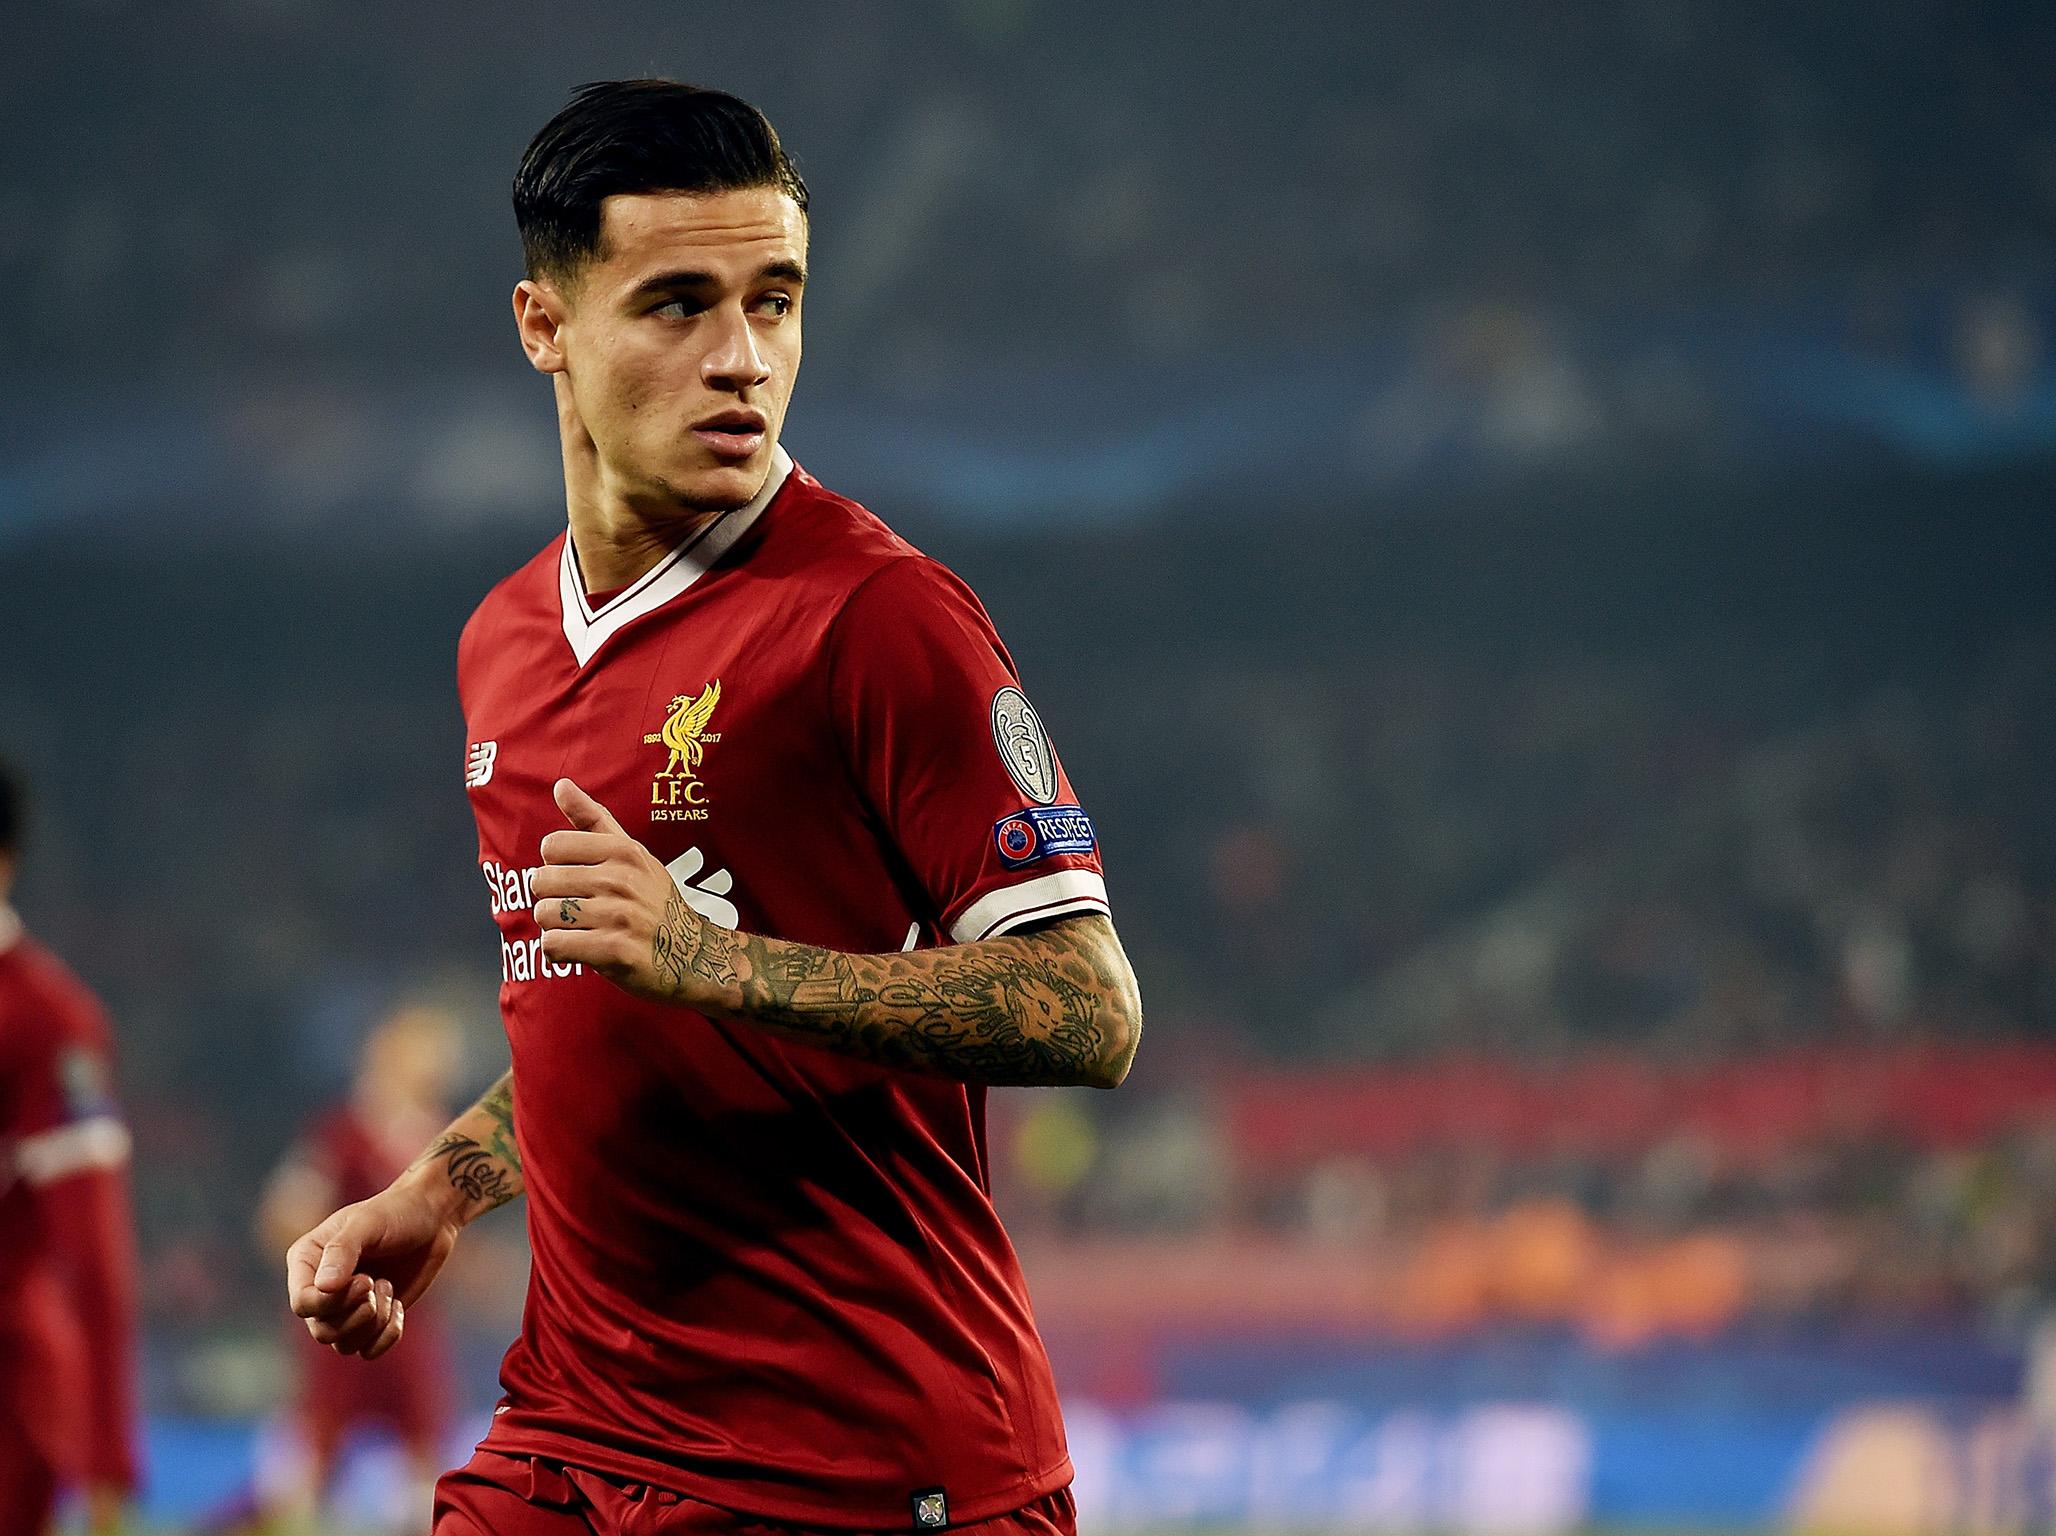 Transfer news, rumours LIVE: Philippe Coutinho demands Liverpool exit, Arsenal get boost and United latest